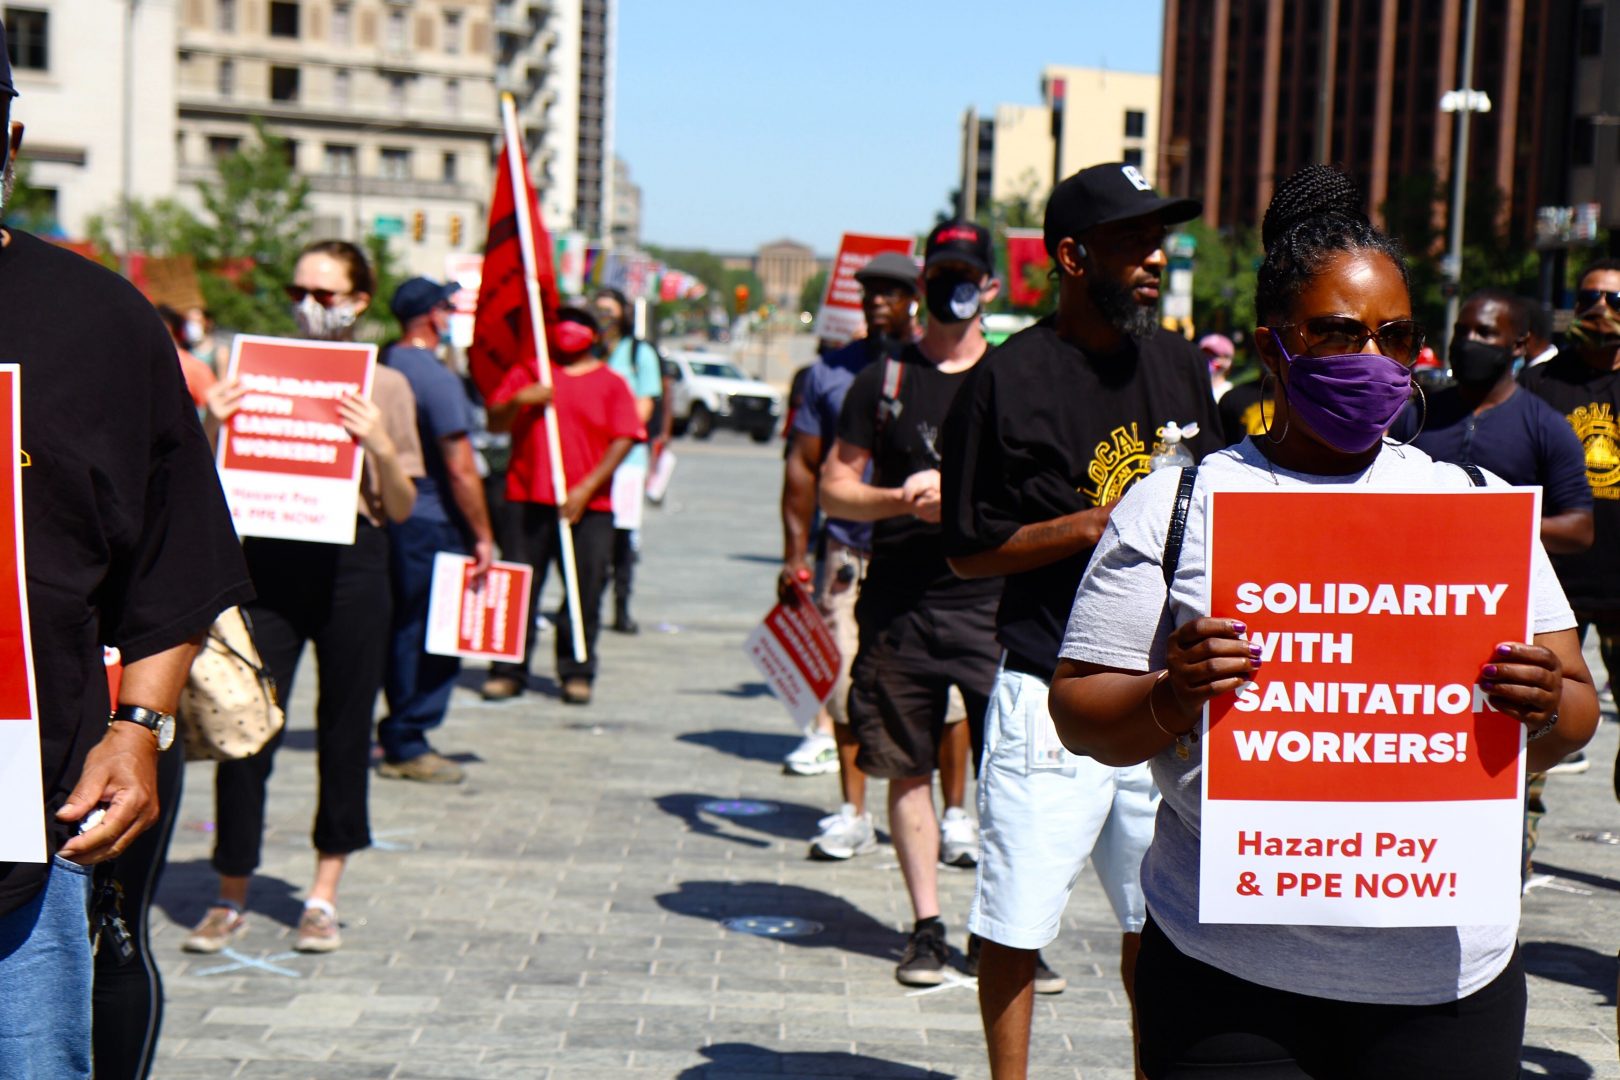 Labor union members including teachers and librarians joined a solidarity protest for the conditions of sanitation workers in the city of Philadelphia